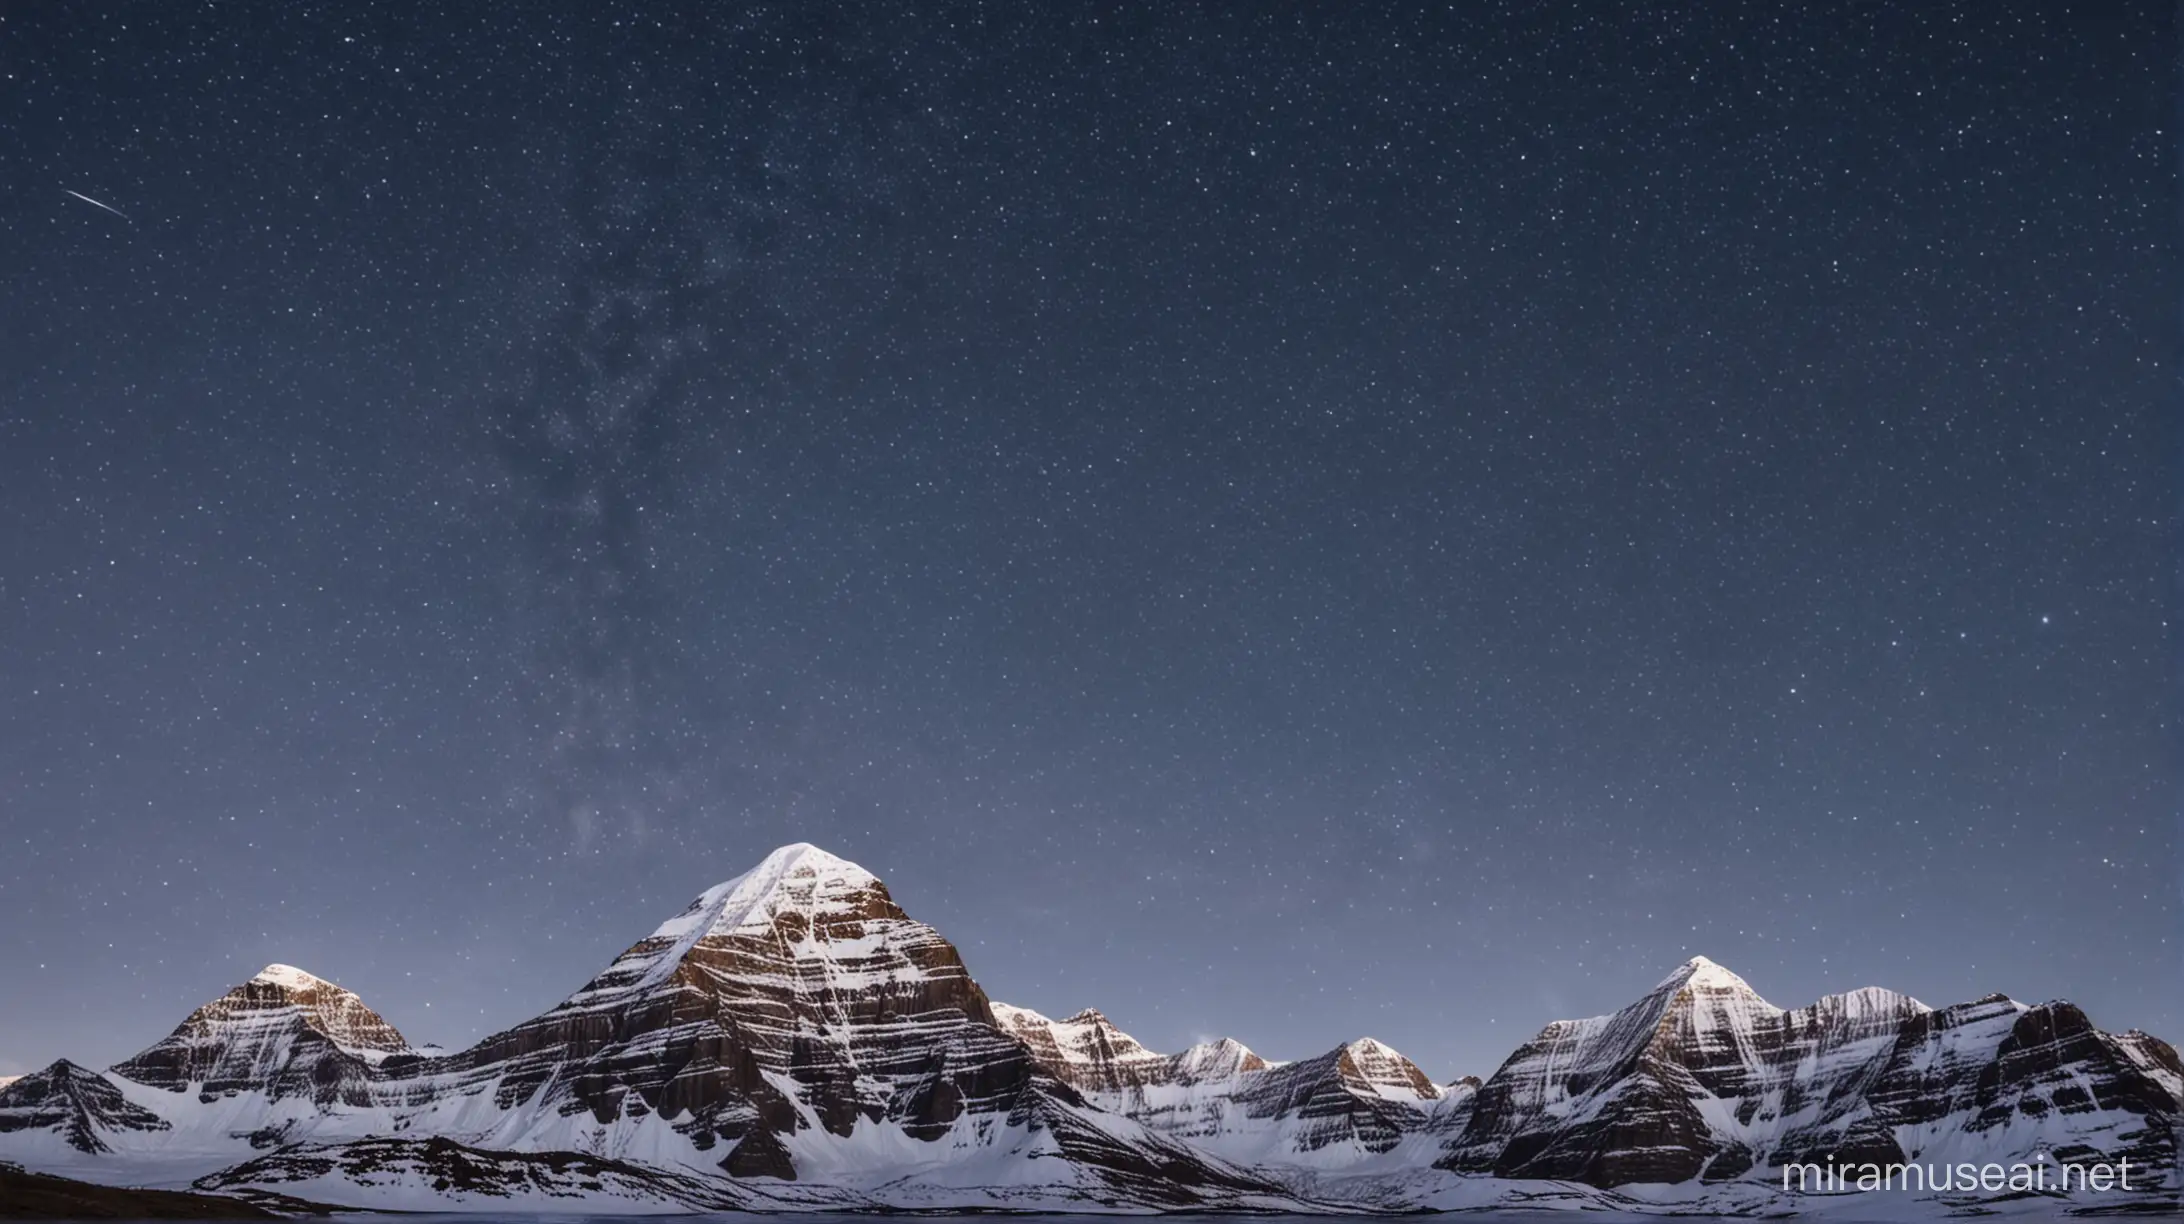 Starry Night Over SnowCovered Mount Kailash